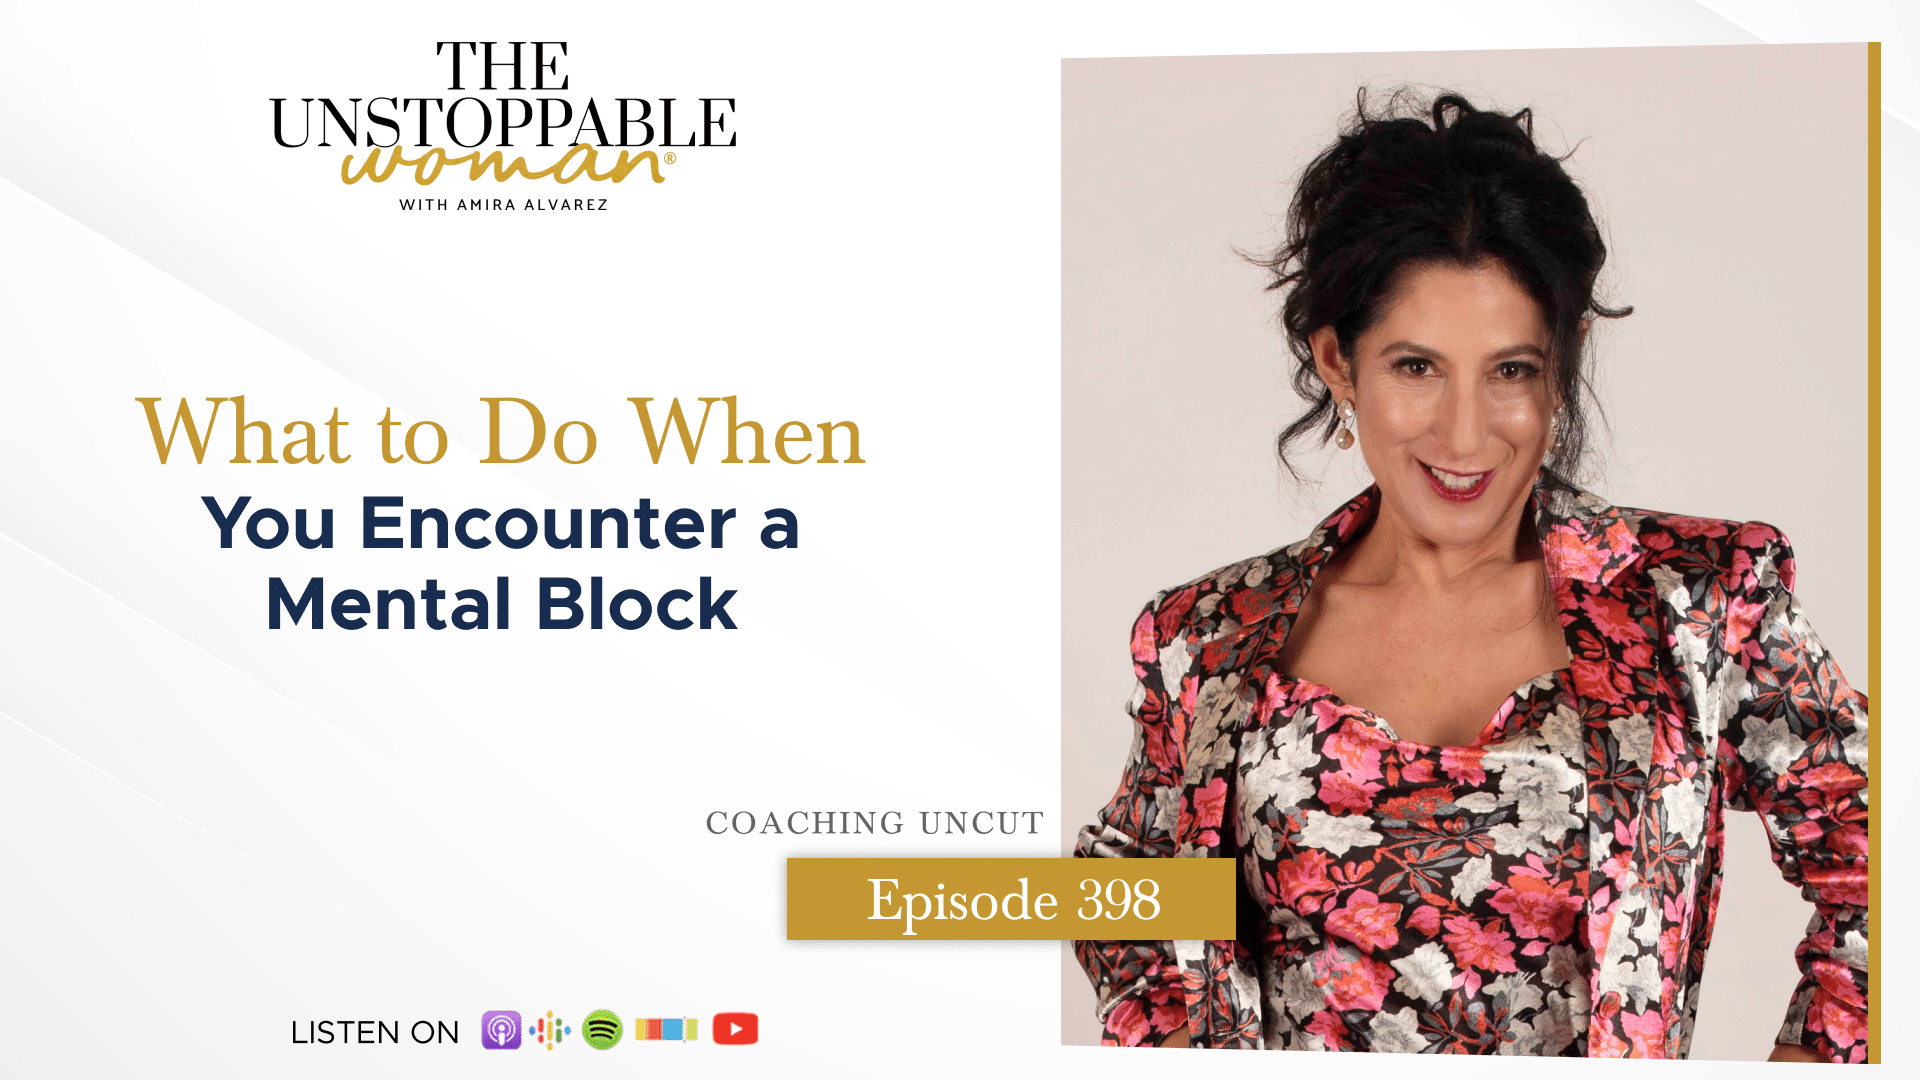 [Image: What to Do When You Encounter a Mental Block]